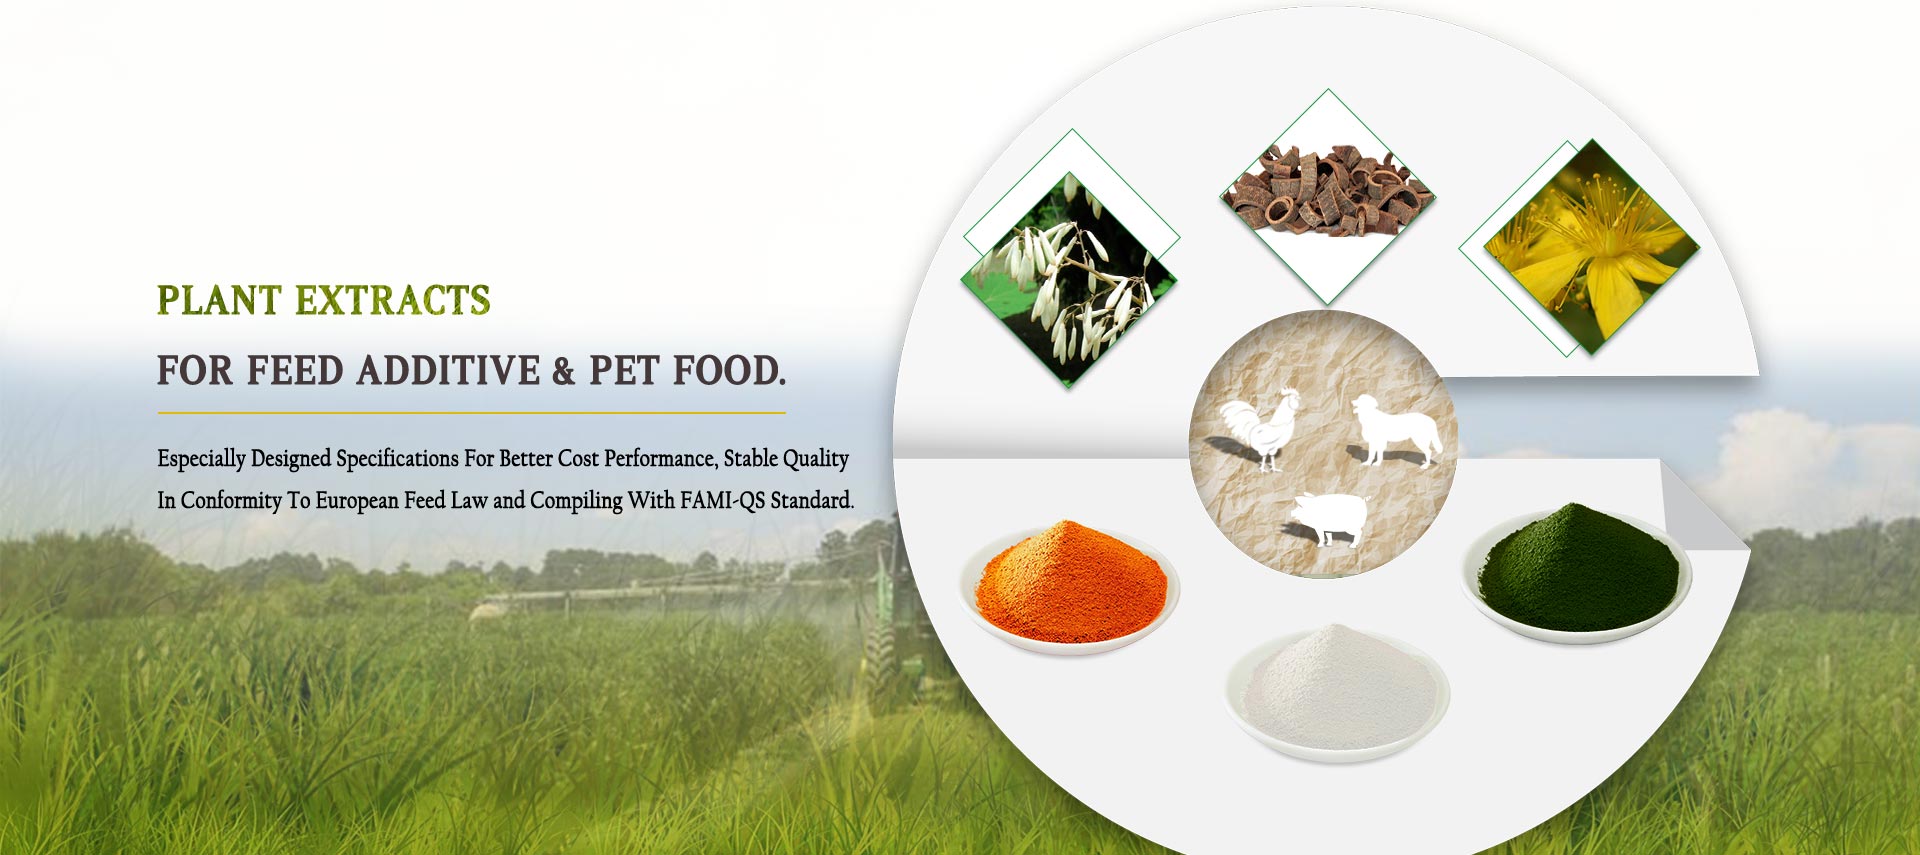 Plant Extracts for Feed Additive & Pet Food